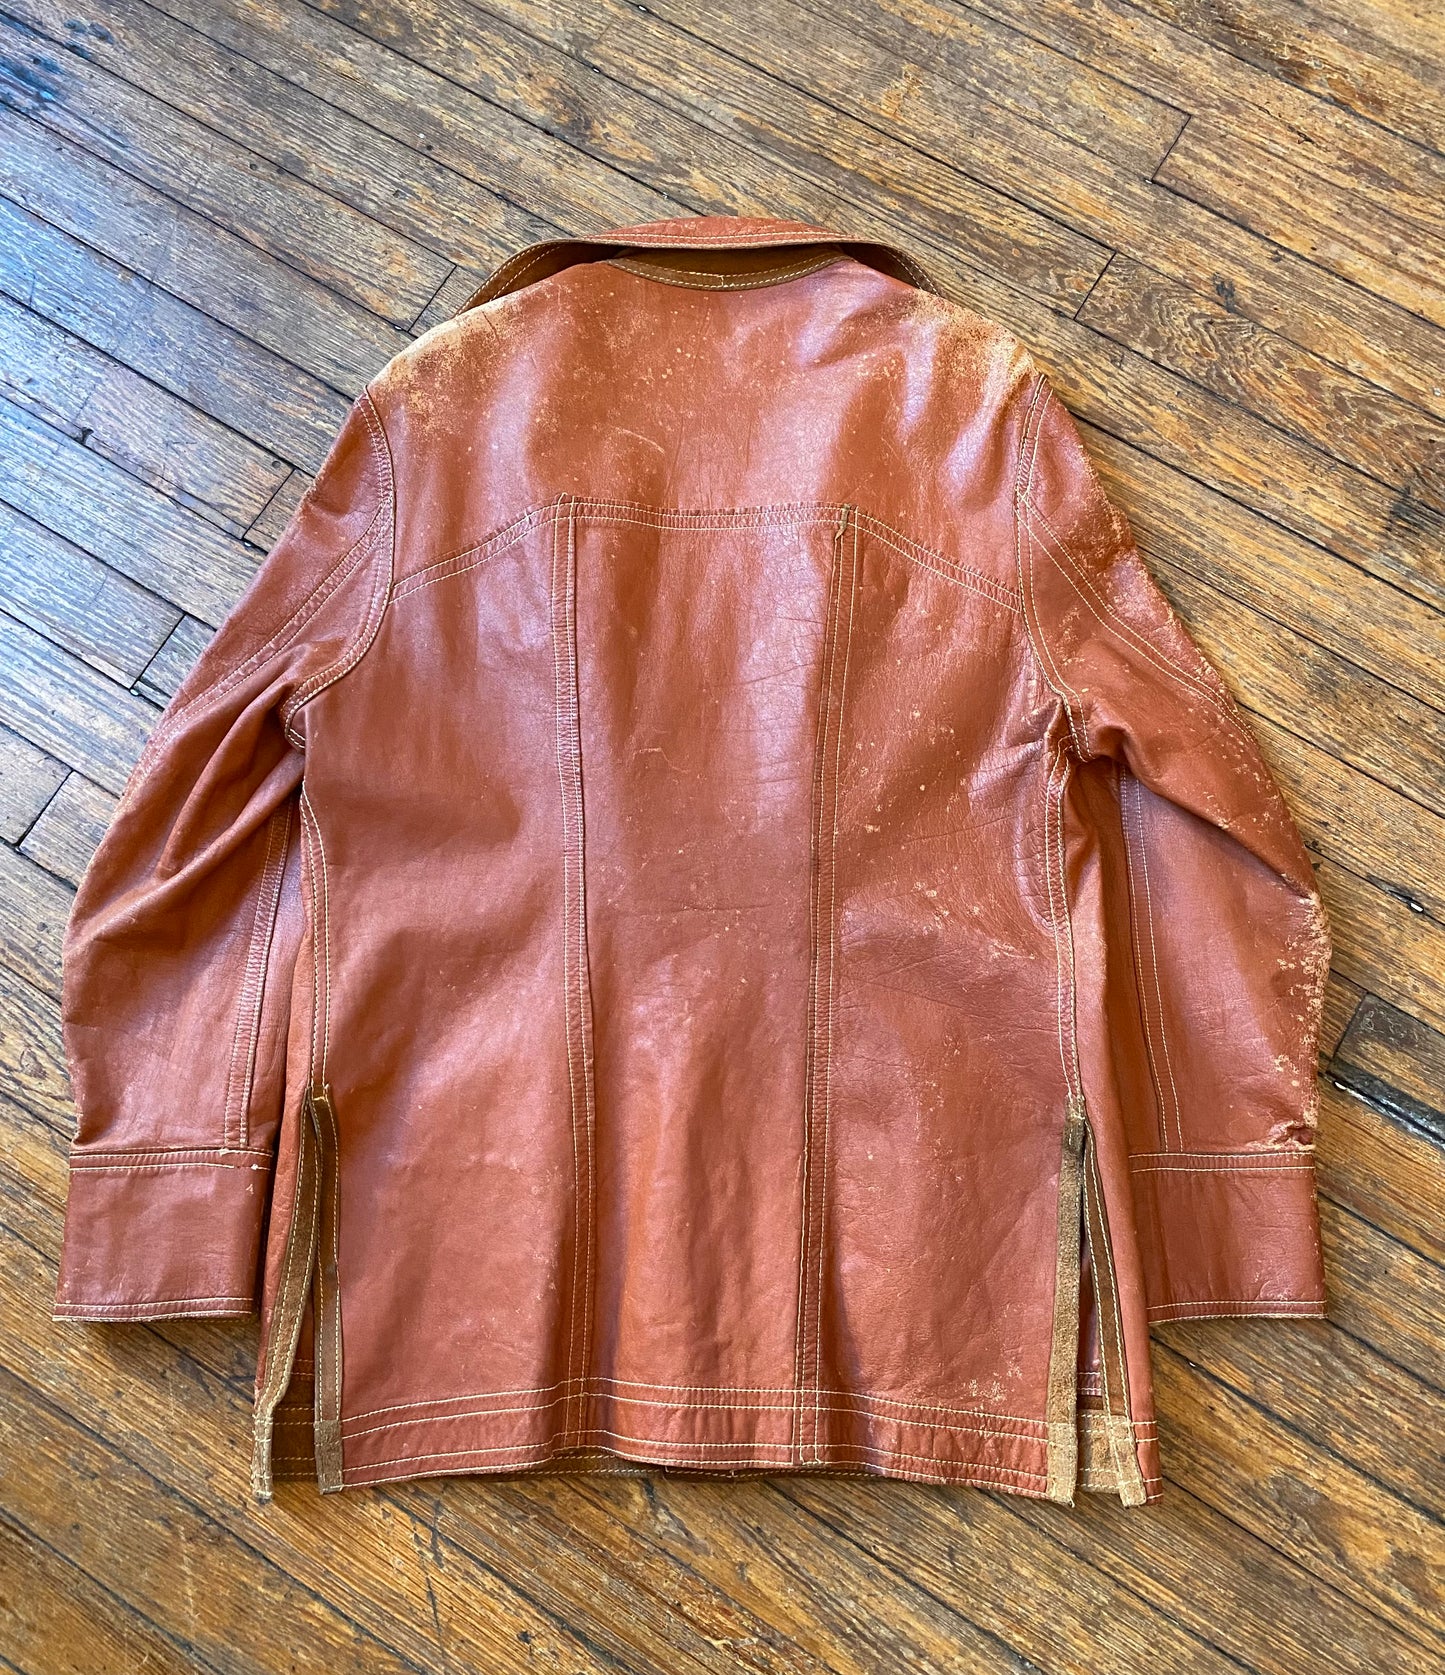 Reversible Rusty Brown Leather/Suede Jacket